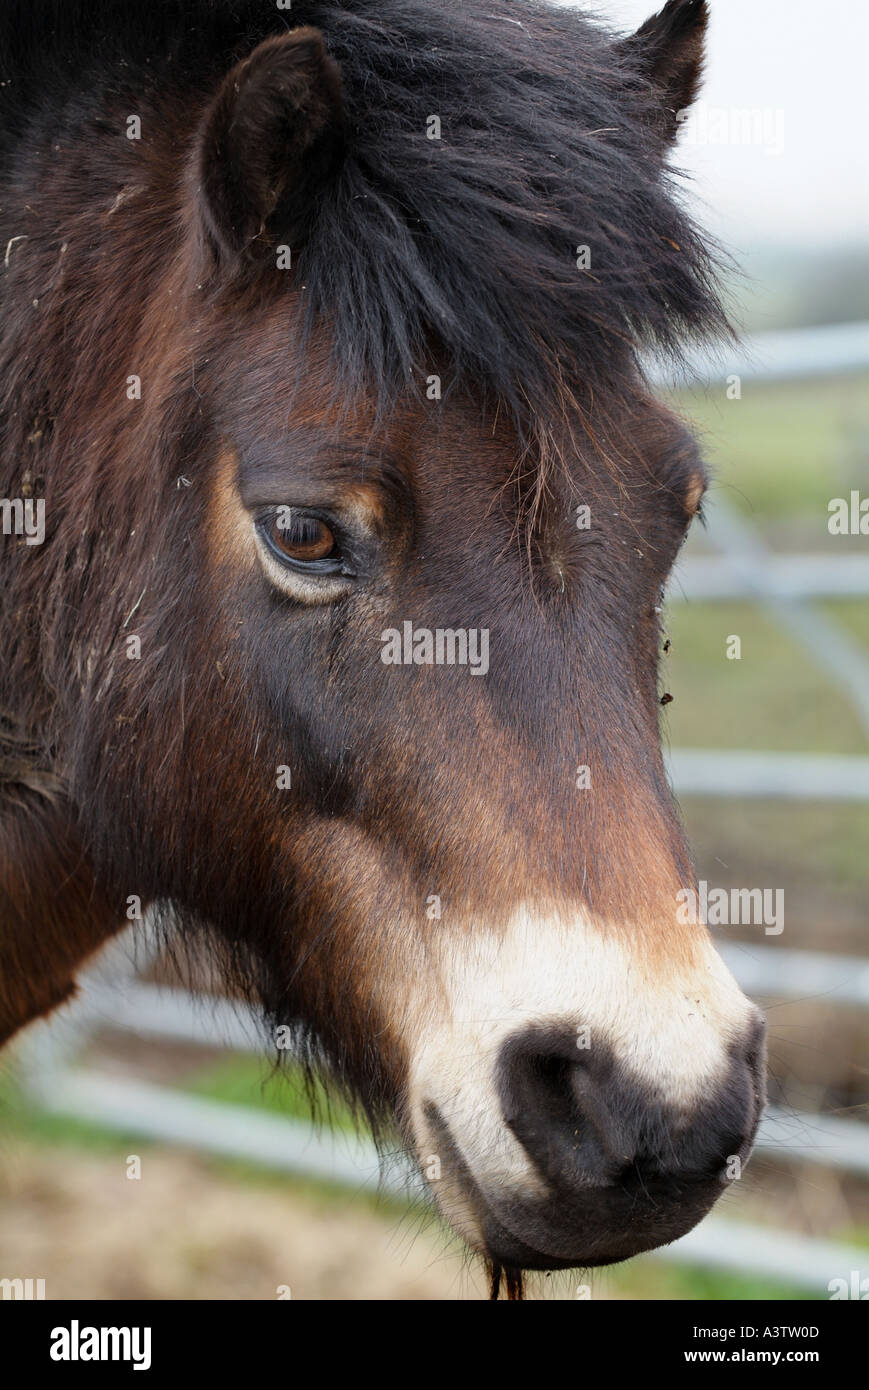 Close up photograph of a brown chestnut horse Stock Photo